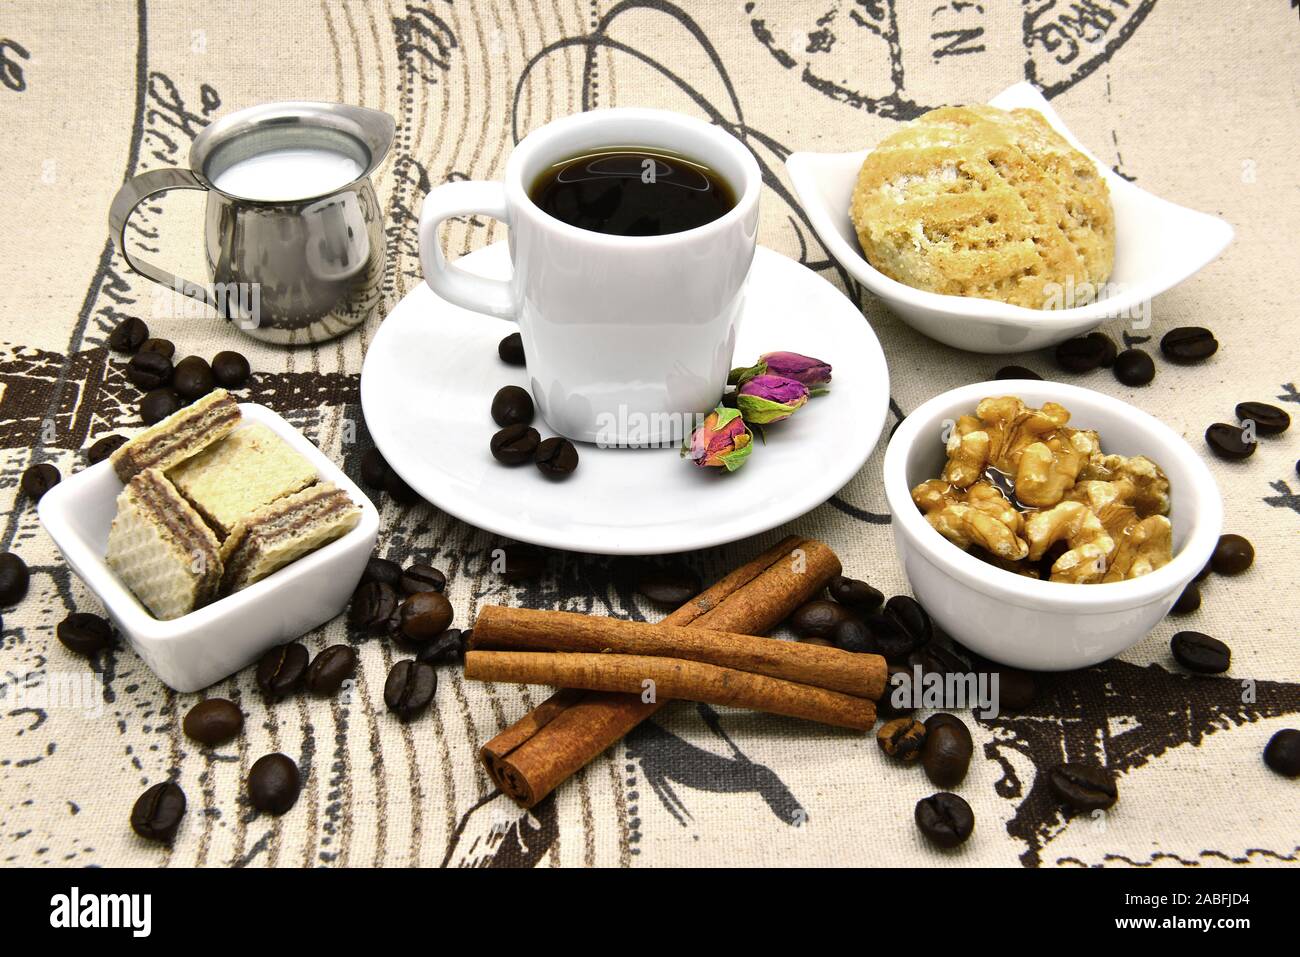 Light breakfast with coffee and desserts. Coffee, milk, waffles, cookies and nuts. Stock Photo